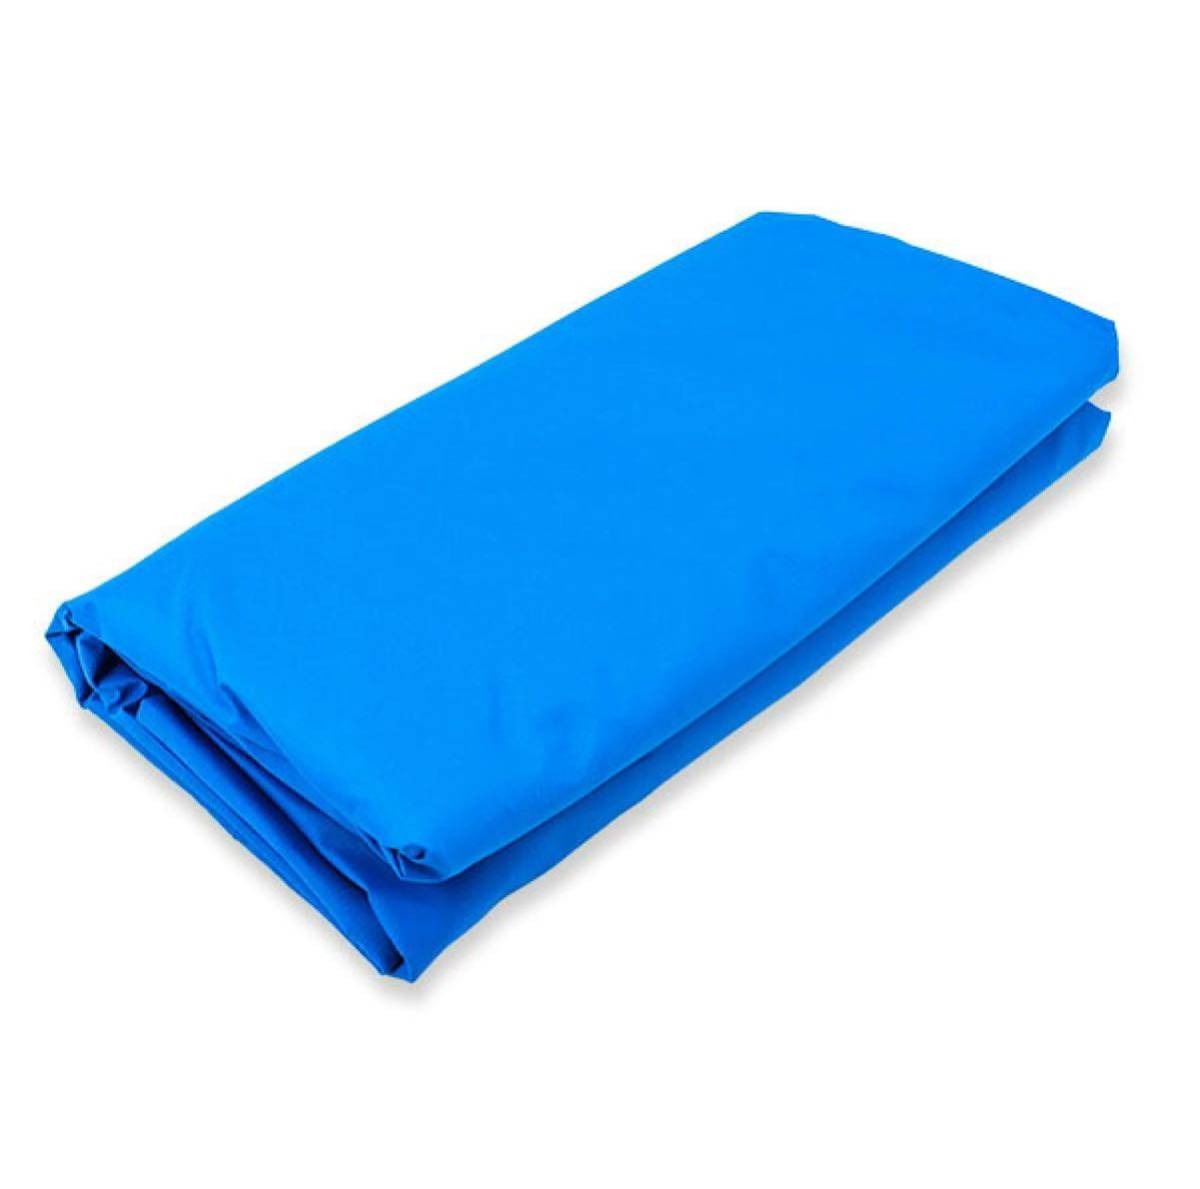 * Inte ks* frame * pool for * pool body only * blue color * parts * unused *INTEX*#10942*220×150×60cm for *